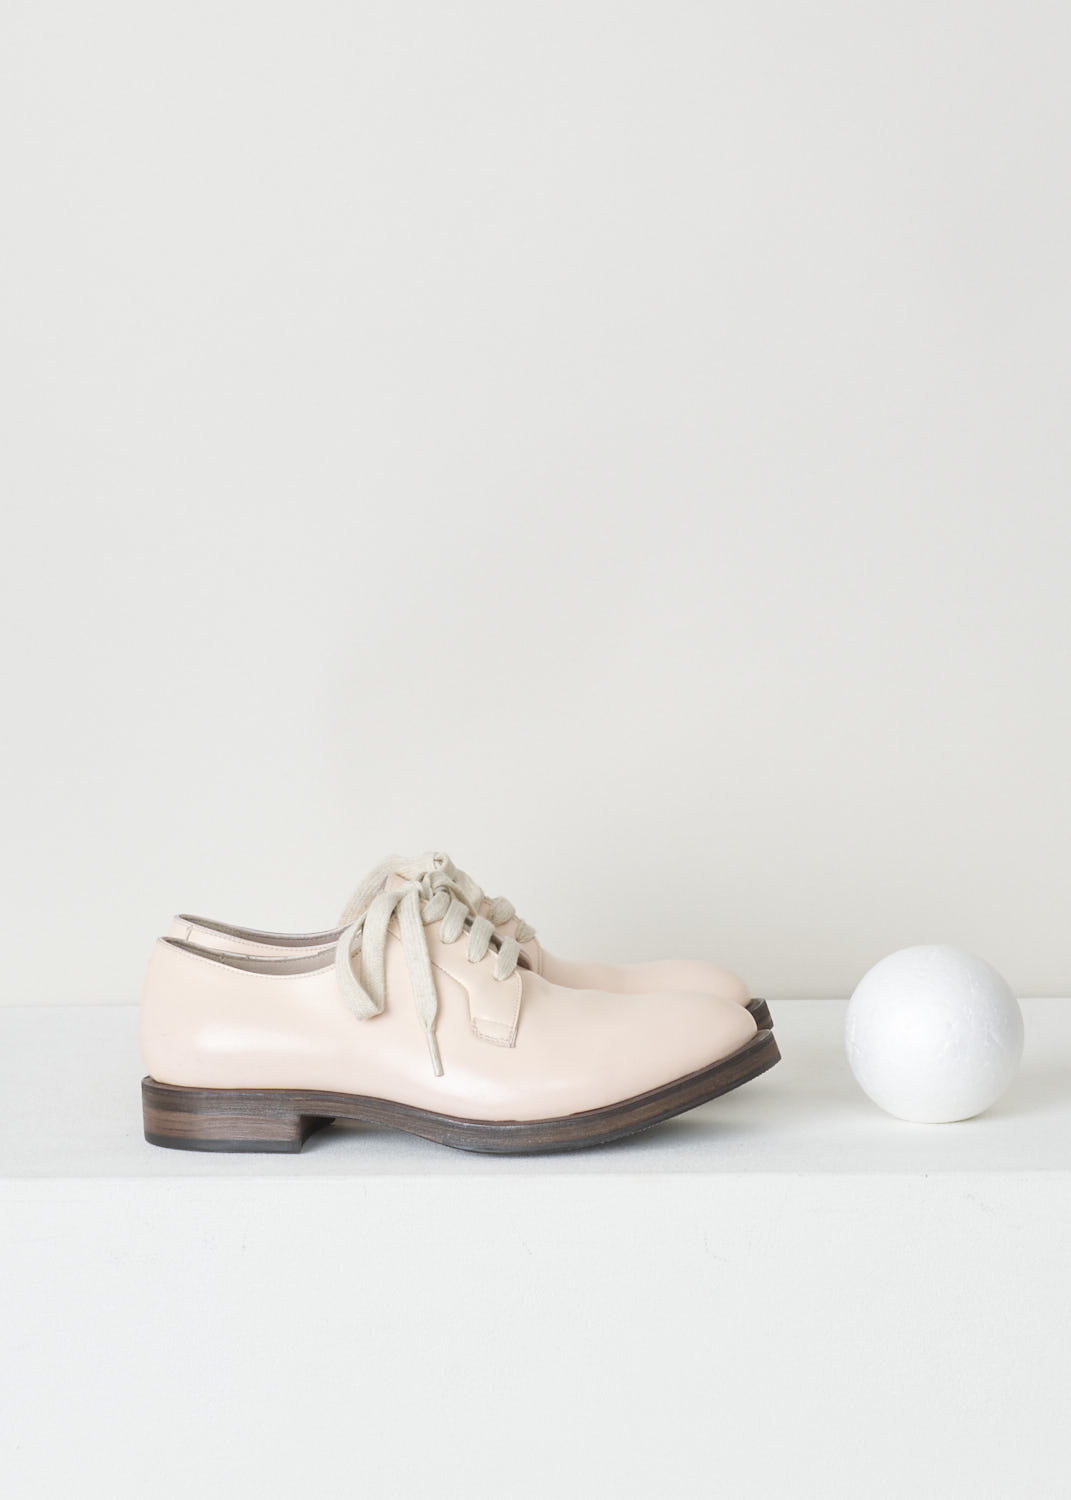 BRUNELLO CUCINELLI, BLUSH PINK DERBY SHOES, MZDVLC113_C6203, Pink, Side, Pale blush pink leather derby shoes with a shiny finish. This model has a classic lace-up closure. These shoes have a rounded toe. The sole is a contrasting dark brown color. 

Heel height: 1.5 cm / 0.5 inch 
